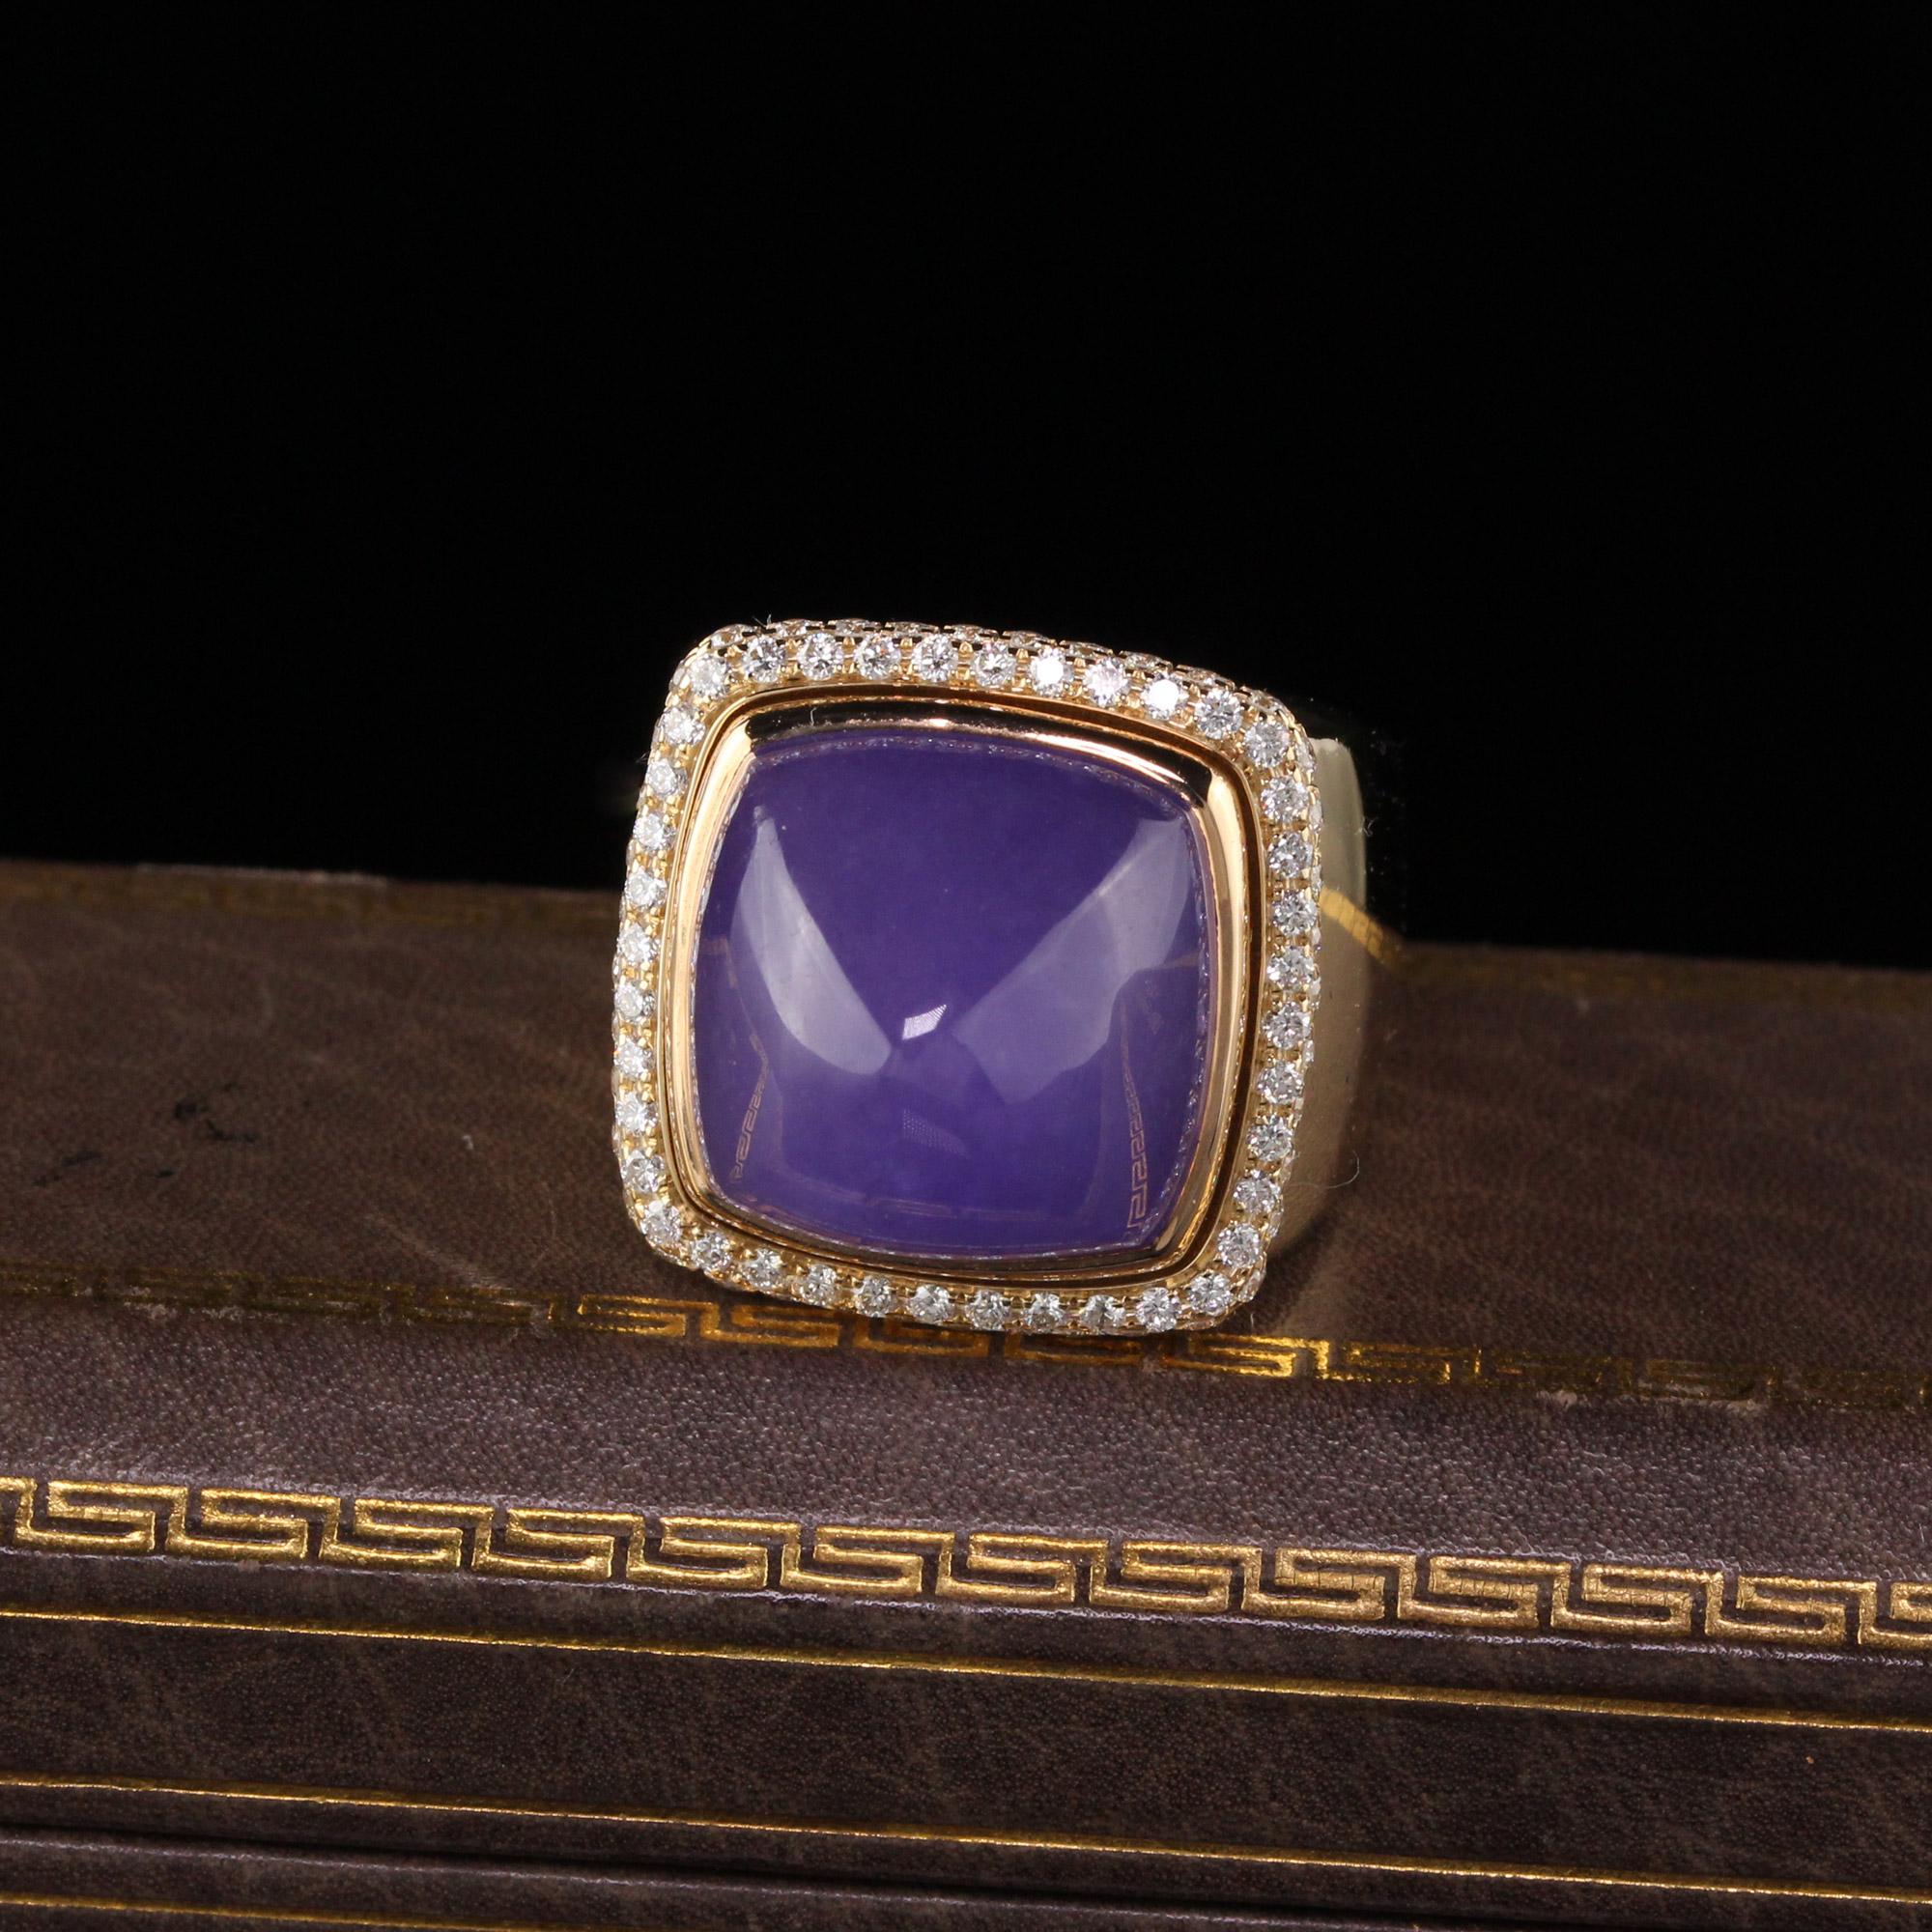 Gorgeous Fred Paris Interchangeable Statement Ring. Excellent like new condition. Features a lavender jade and a smoky Topaz 

#R0436

Metal: 18K Yellow Gold

Weight: 21.4 Grams

Total Diamond Weight: Approximately 0.50 CTS

Diamond Color: